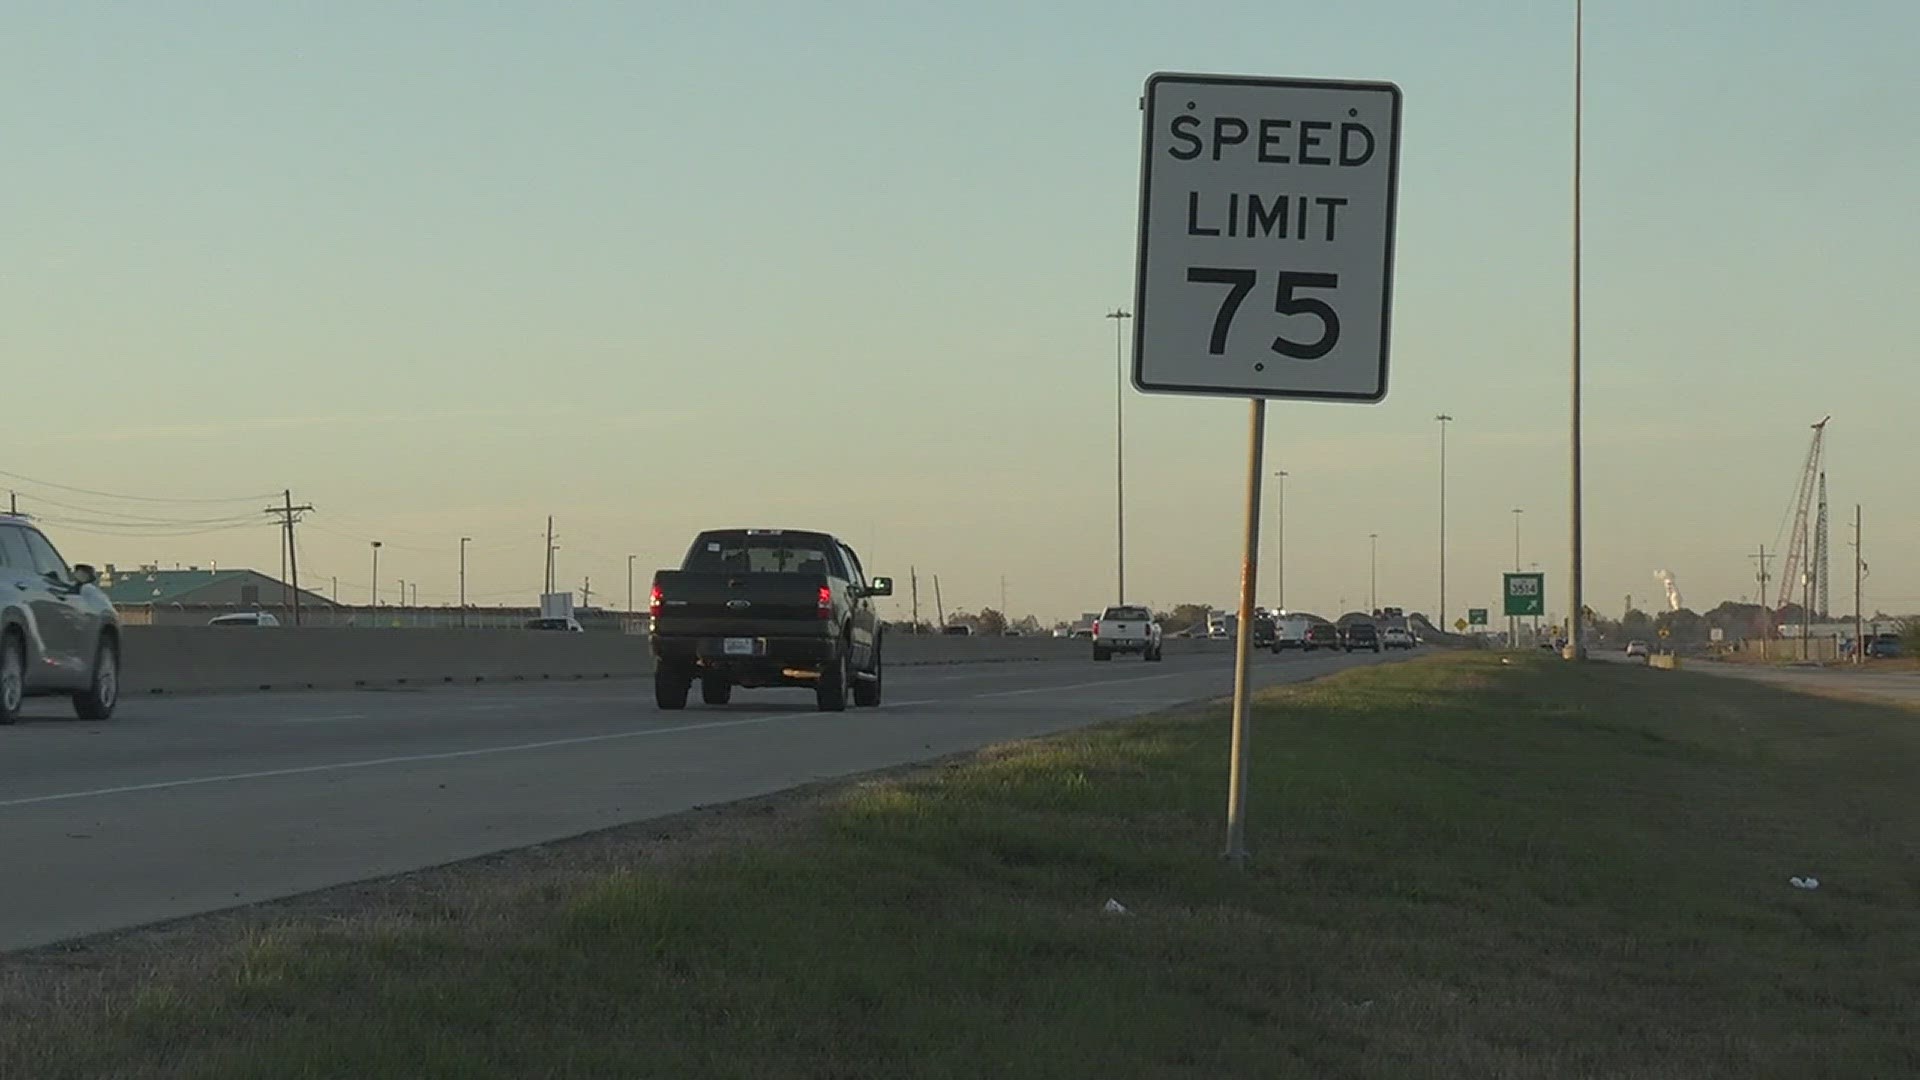 TxDOT says these speed limit changes come after careful analysis. Engineers looked at everything from traffic patterns to crash history.